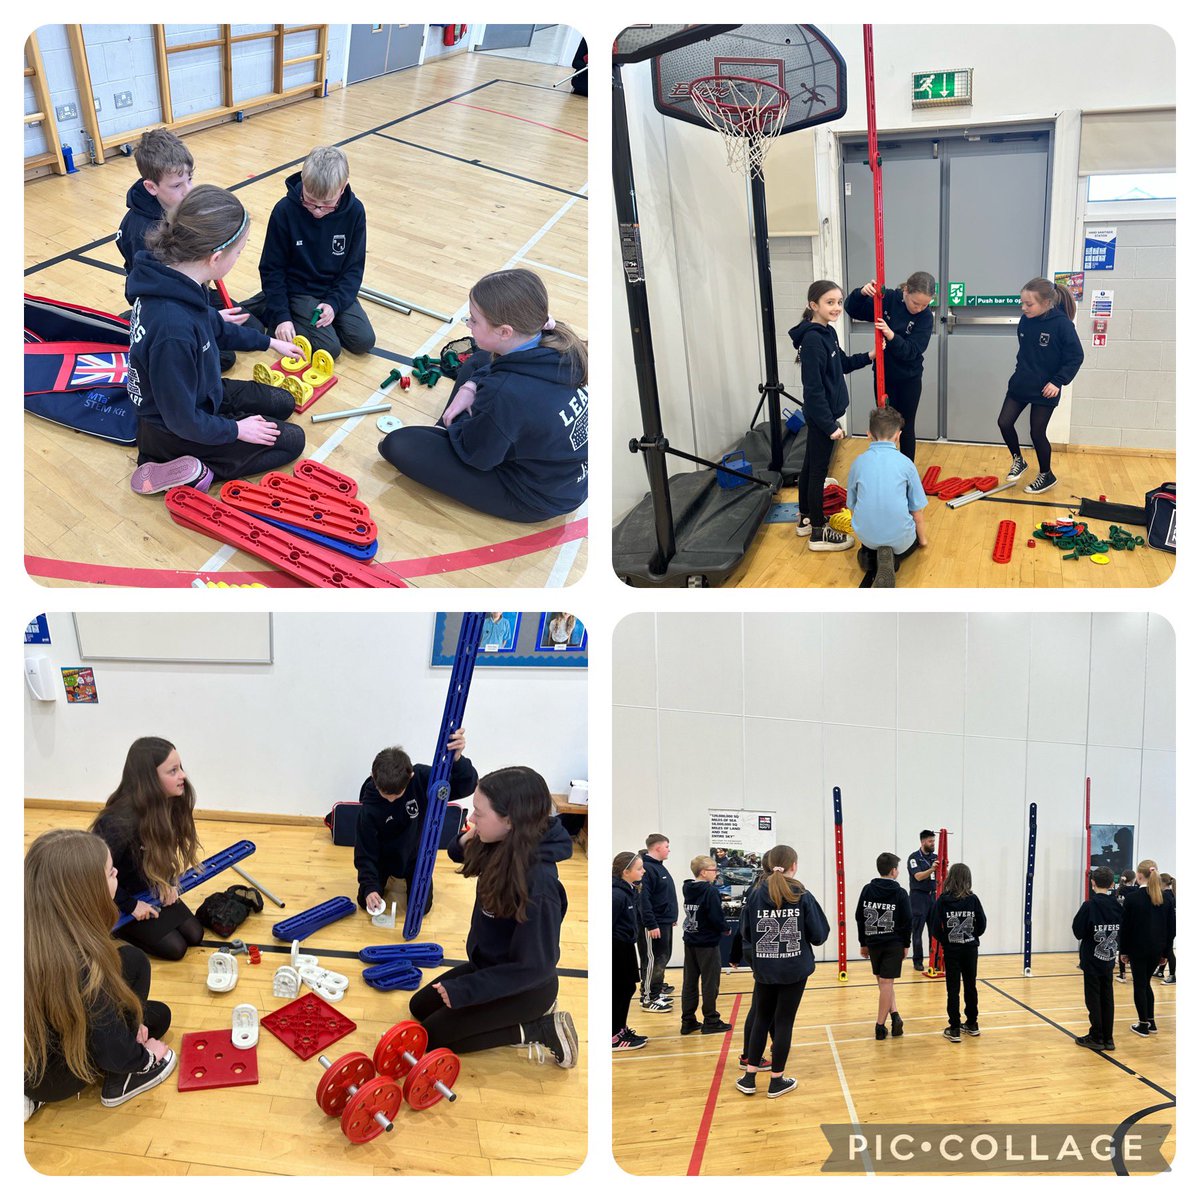 Primary 7 enjoyed a fantastic team building session with the @RoyalNavy today! Children were creative, engaged in high quality discussion and demonstrated evaluative skills to compete design tasks    #growdreamachievetogether